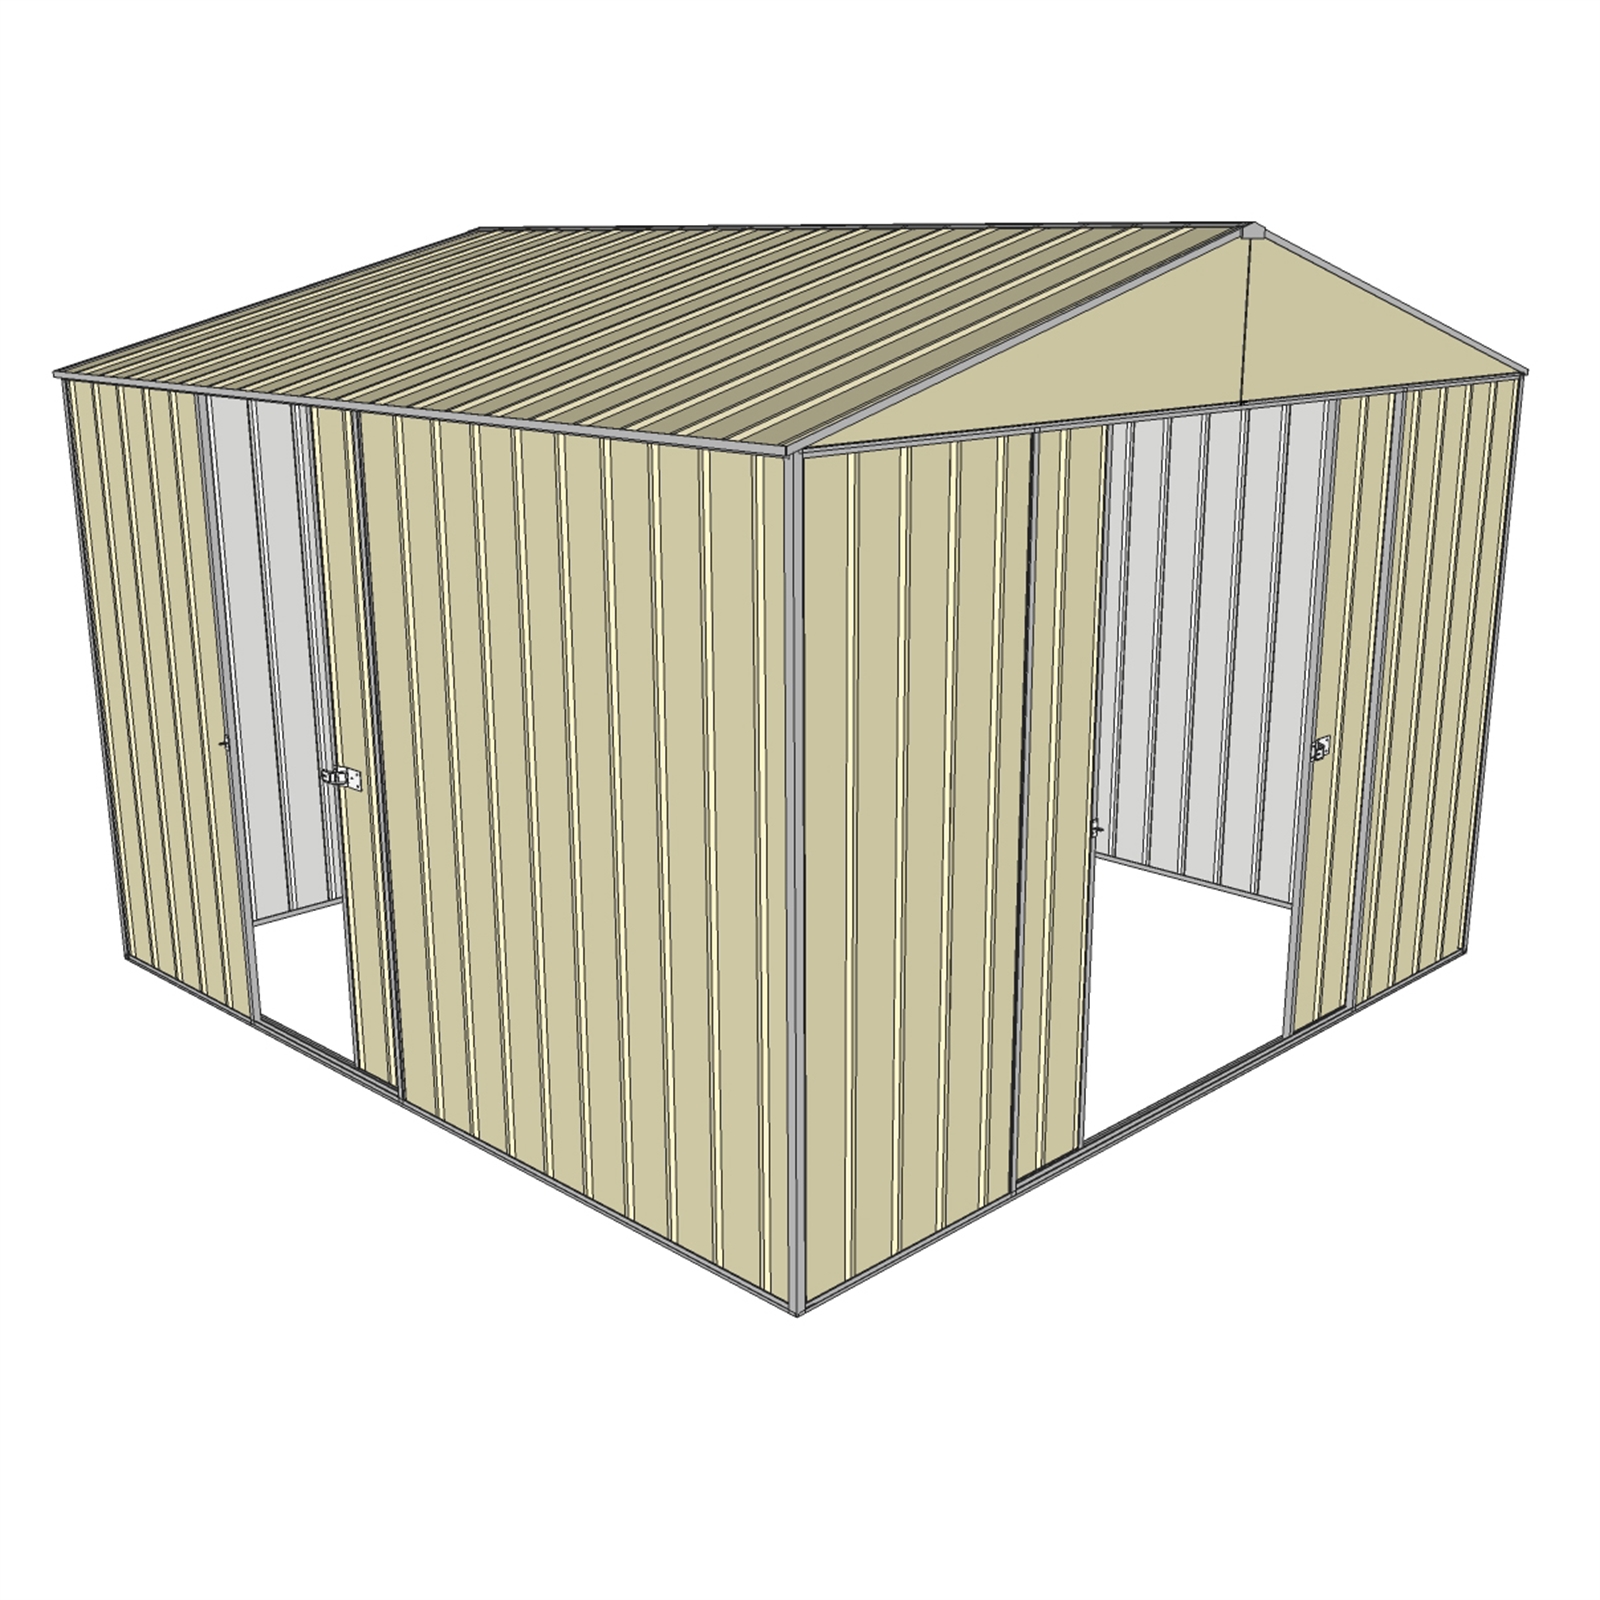 Build-a-Shed 3.0 x 3.0m Cream Triple Sliding Door Shed